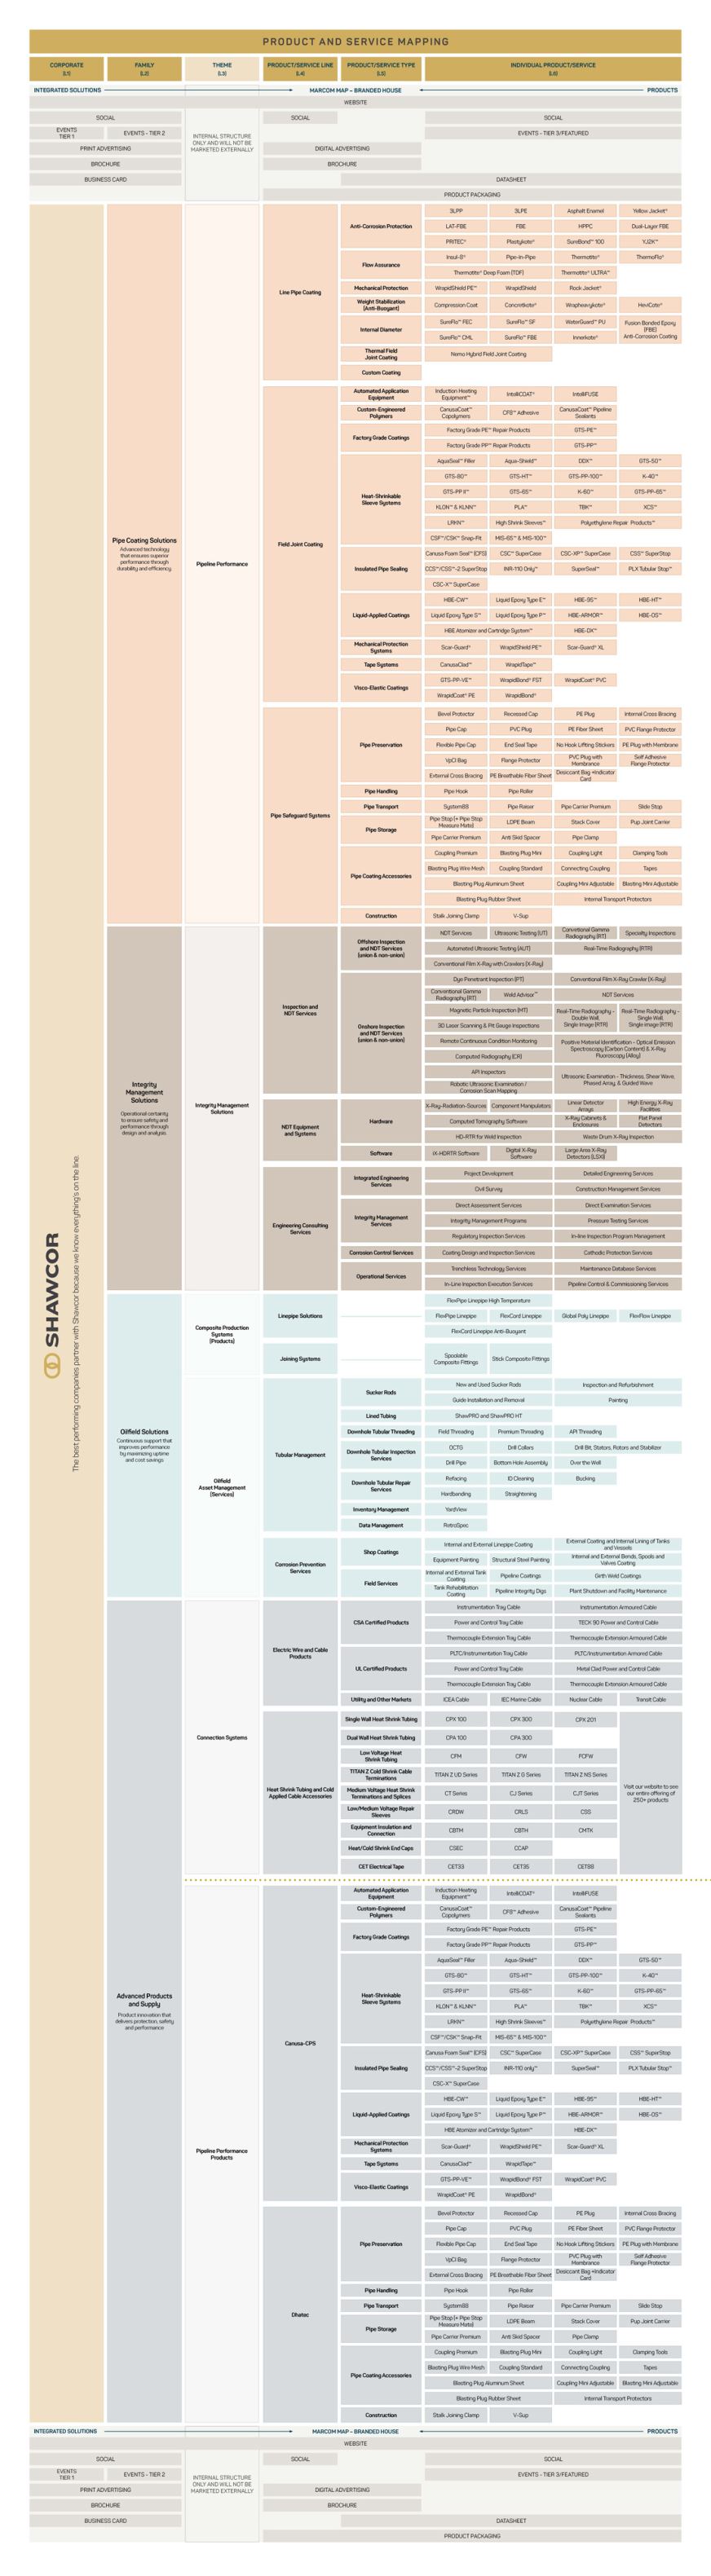 Shawcor's vast, integrated product and service map